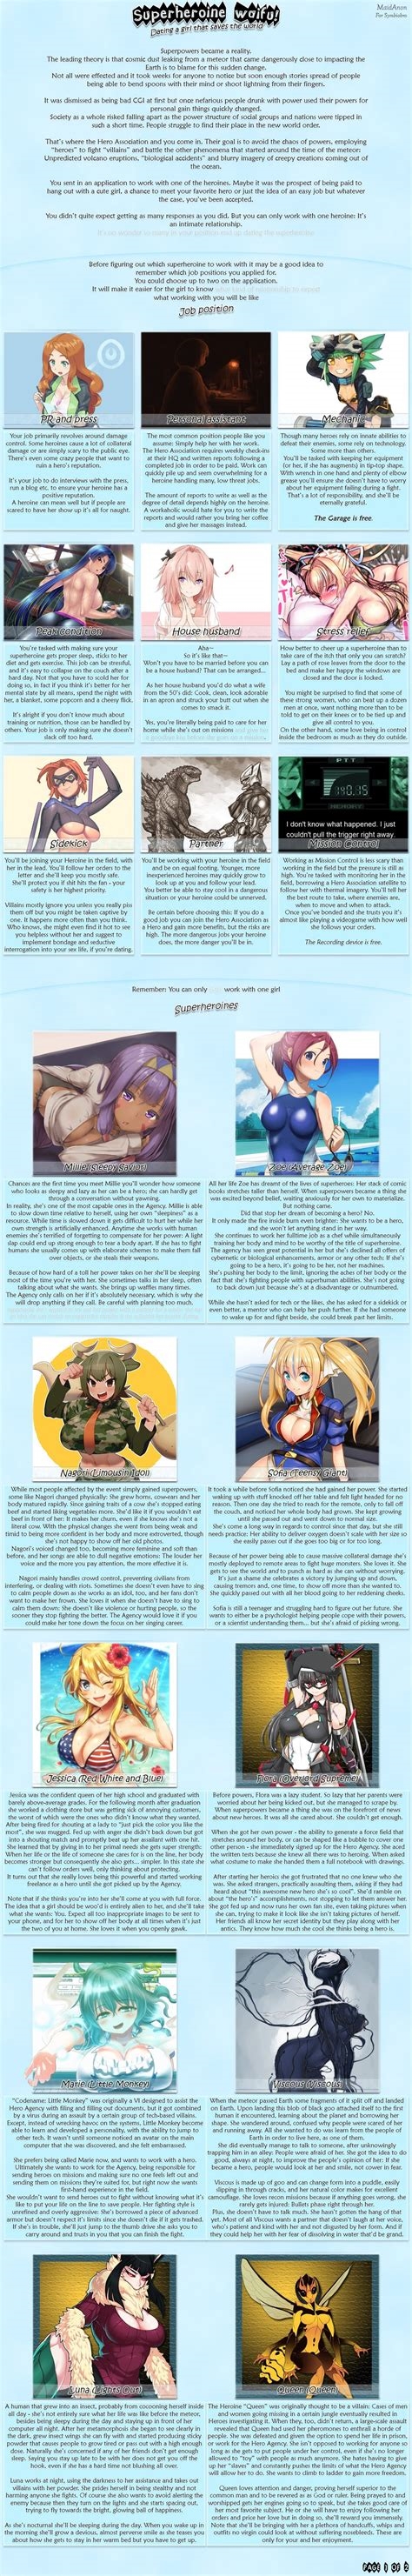 superpower cyoa nude